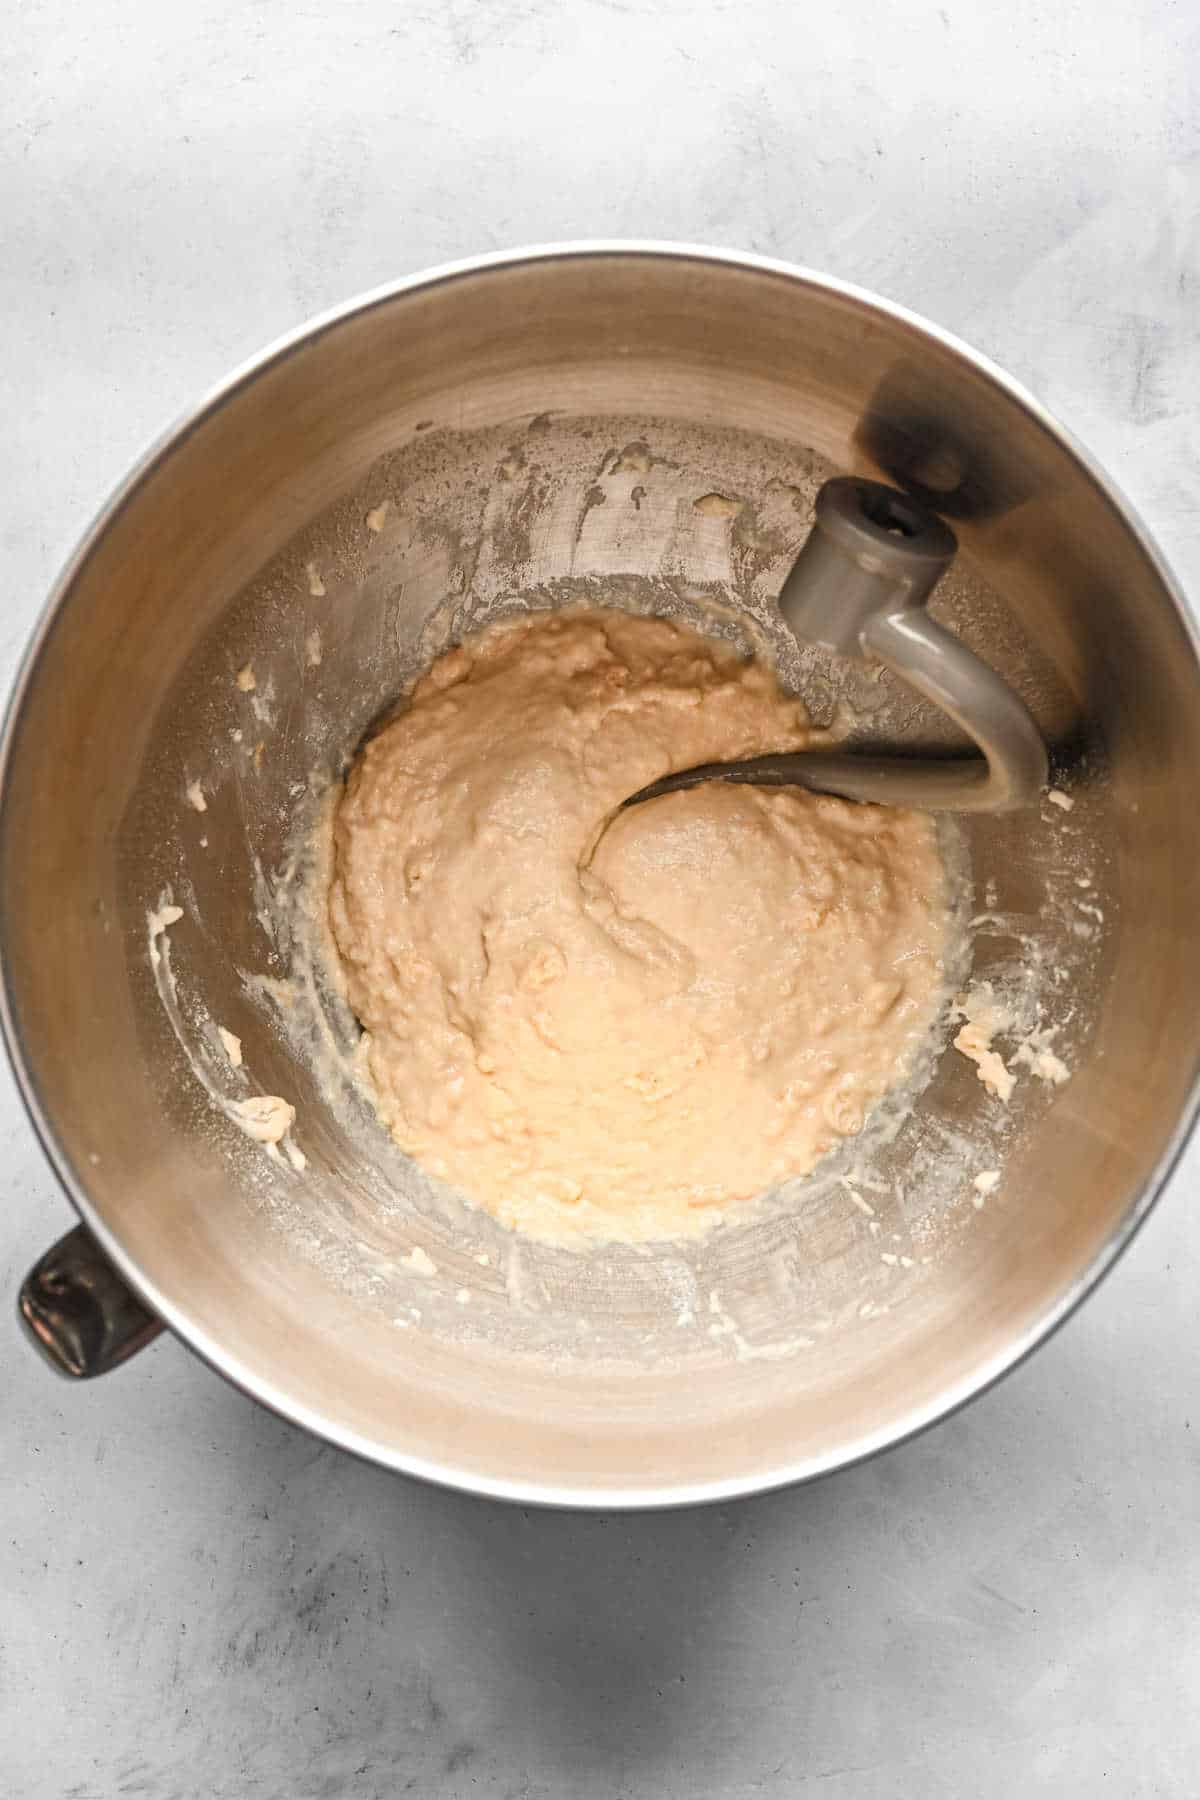 Yeast mixture and milk mixture mixed in a silver mixing bowl. 